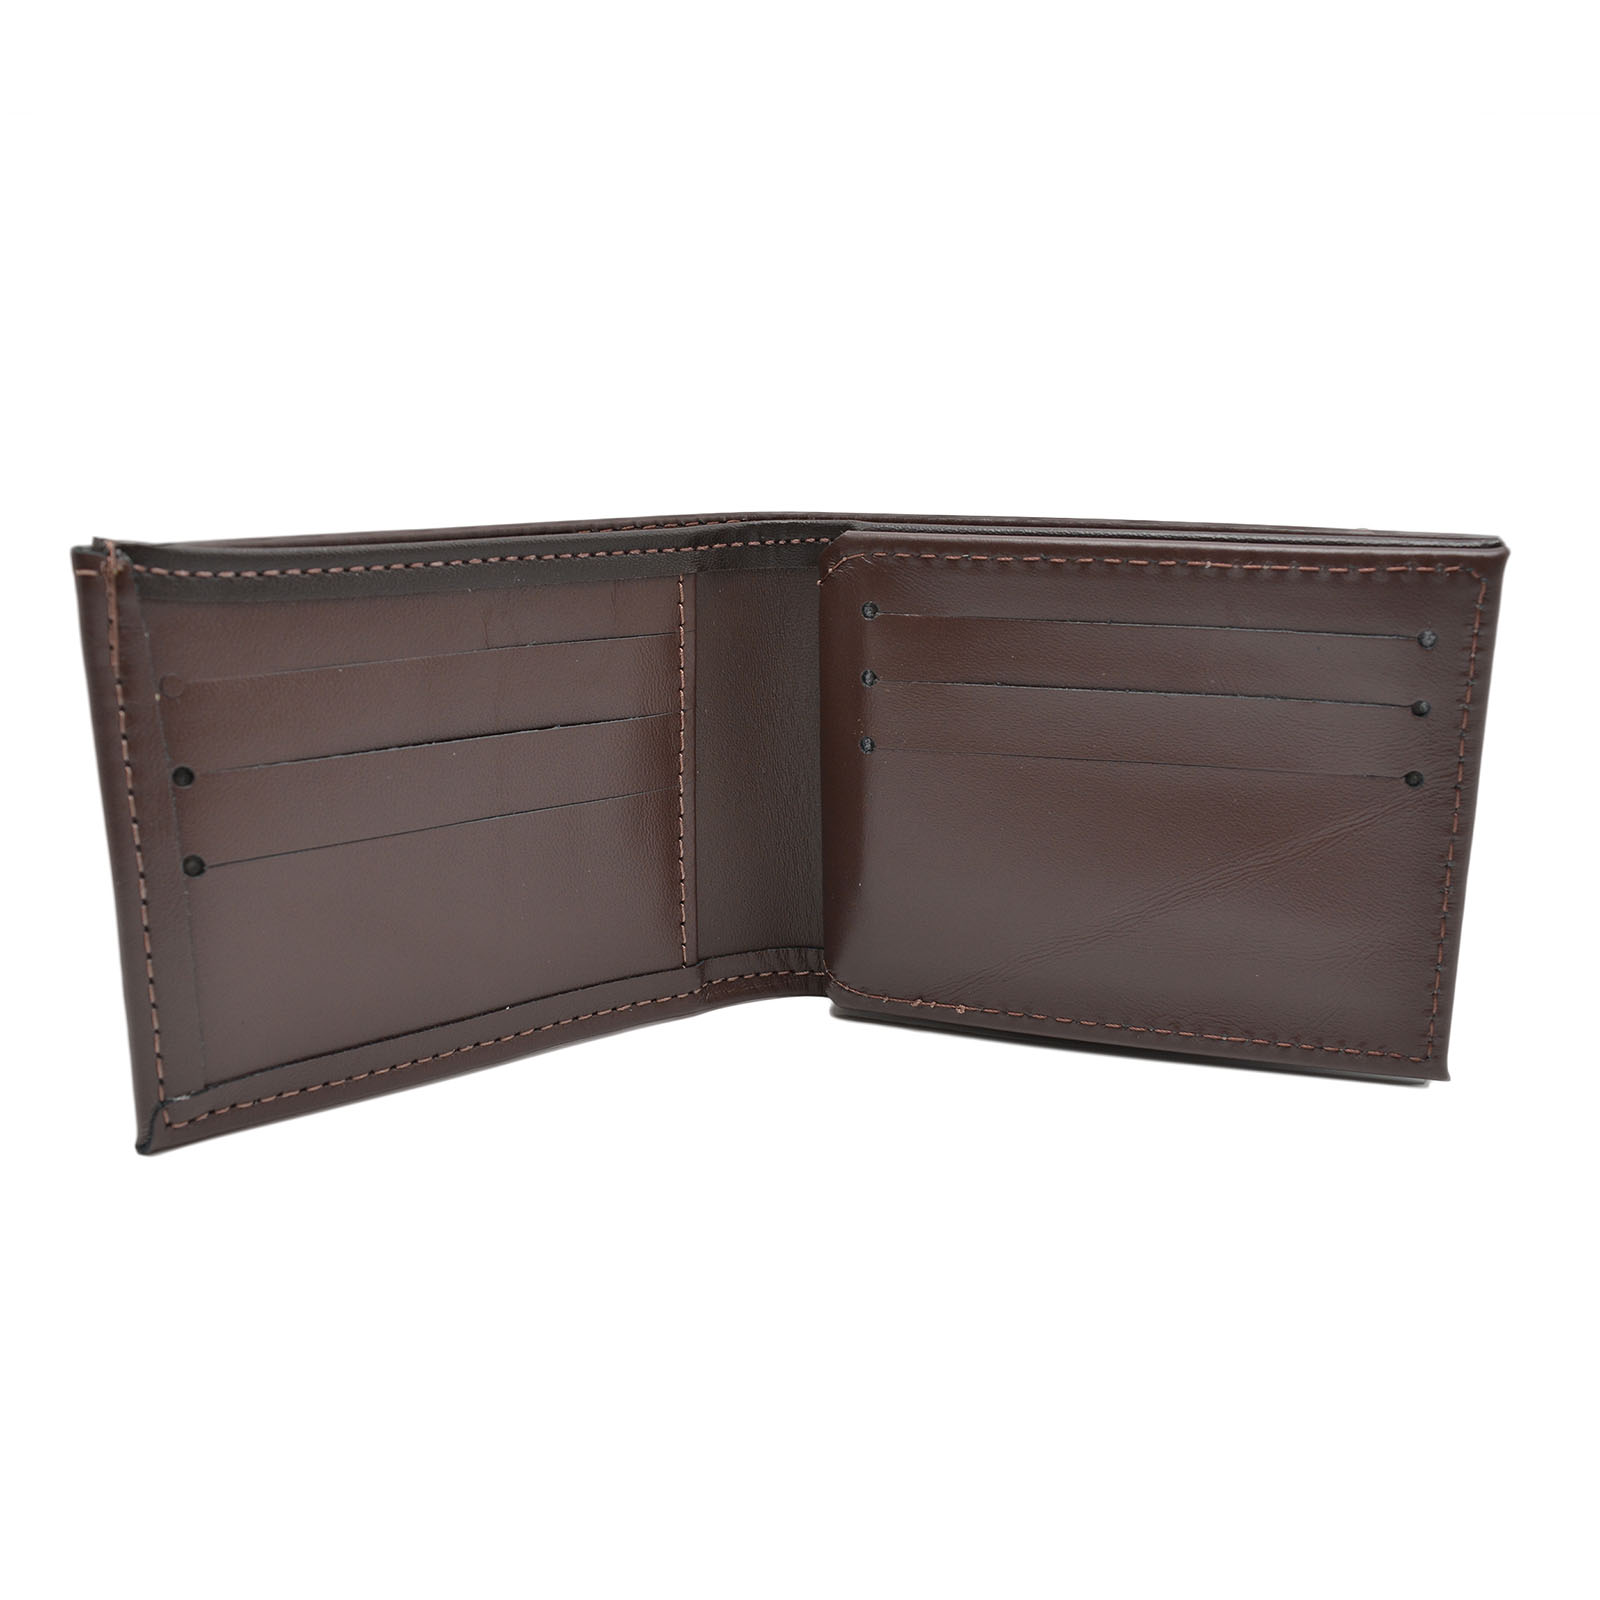 RFID and Brown Leather Options Added - National Duty Supply INC